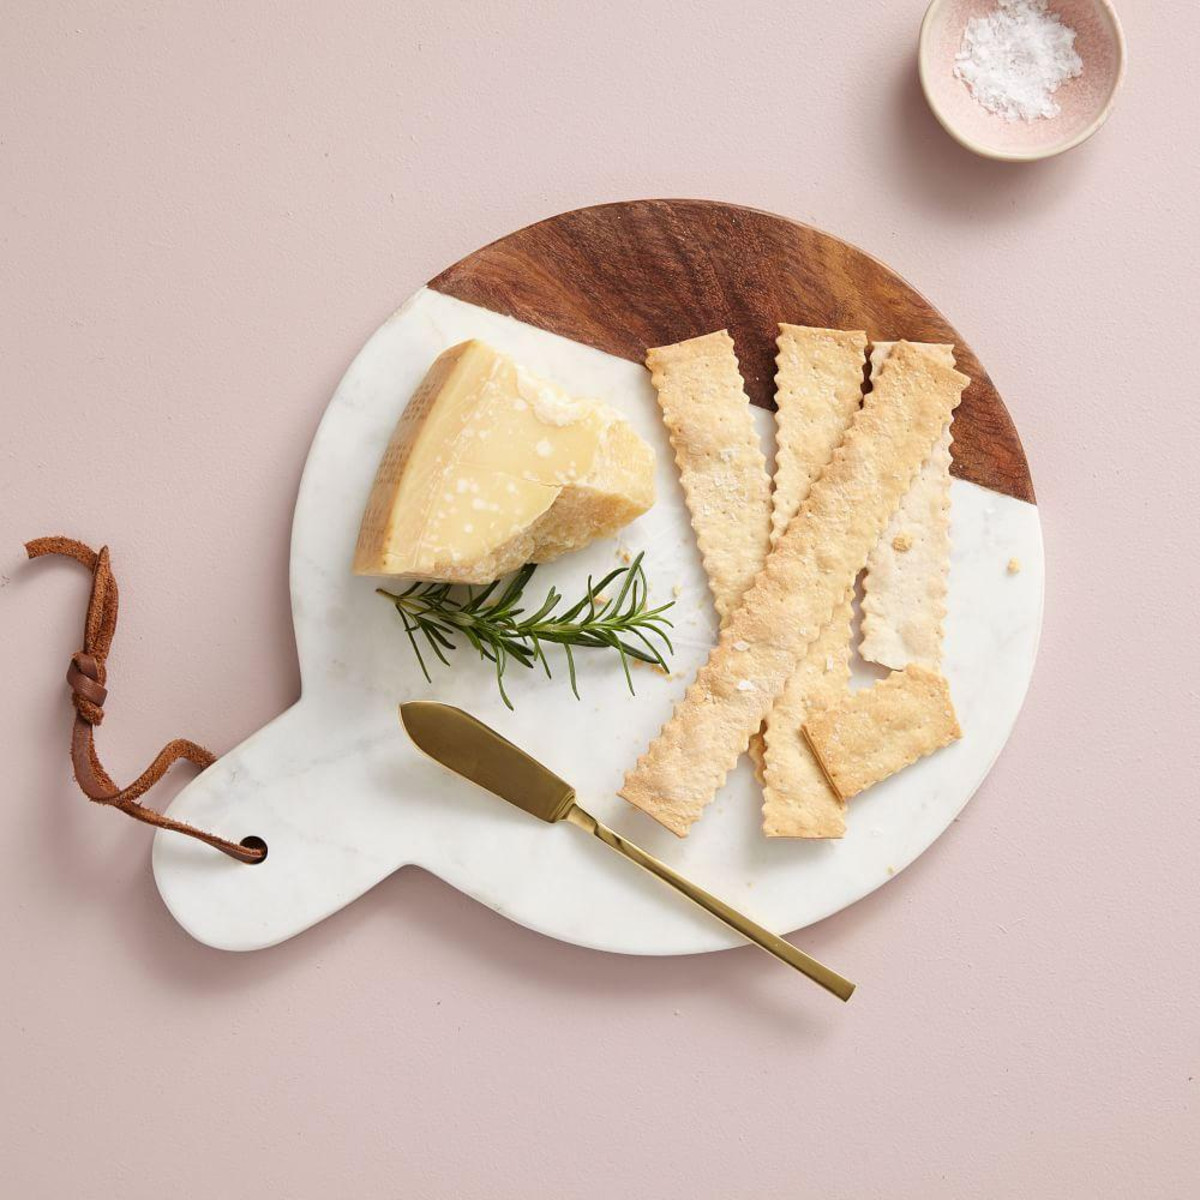 Marble and wood chopping board from West Elm